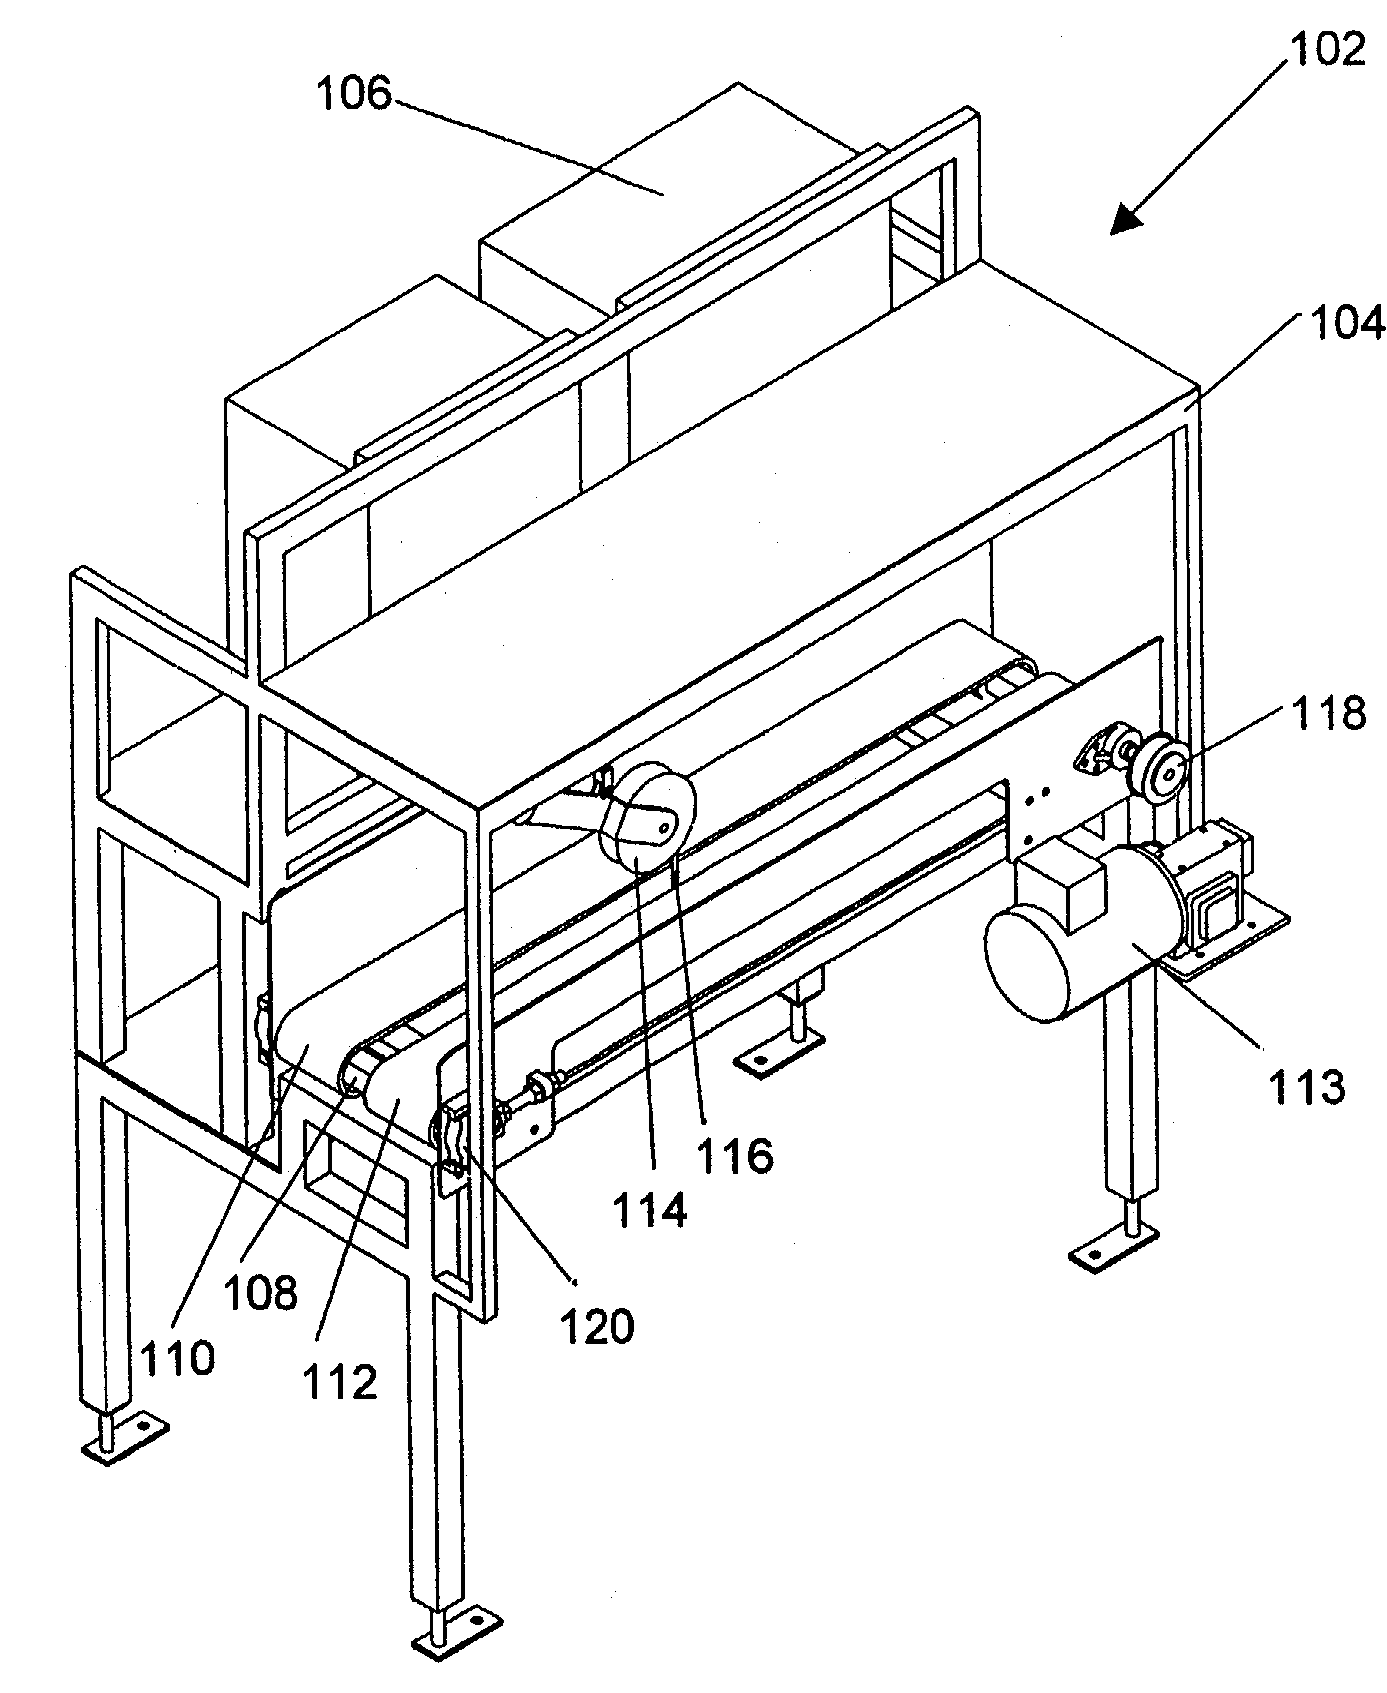 Method and apparatus for meat cut classification of fat thickness for downstream trimming